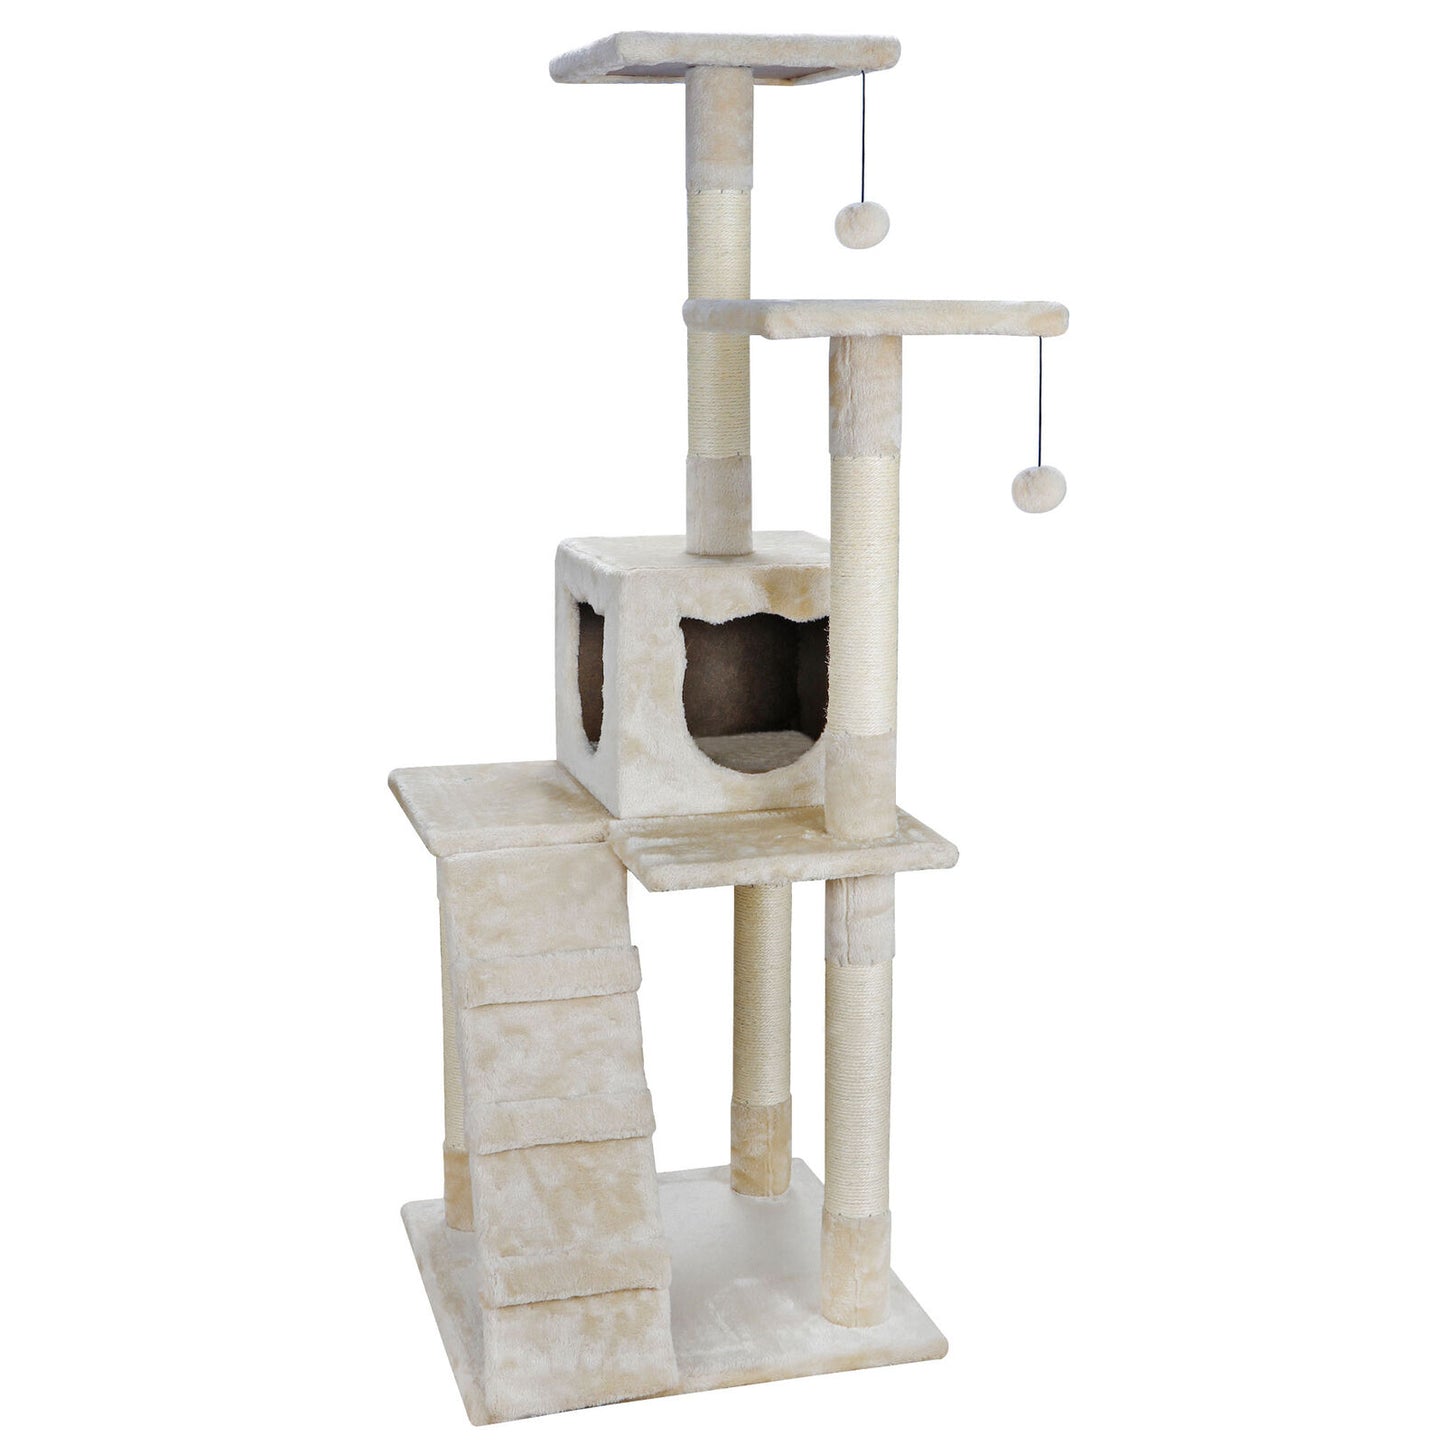 52" Cat Beige Tree Bed Furniture Scratching Tower Post Condo Kitten Pet House